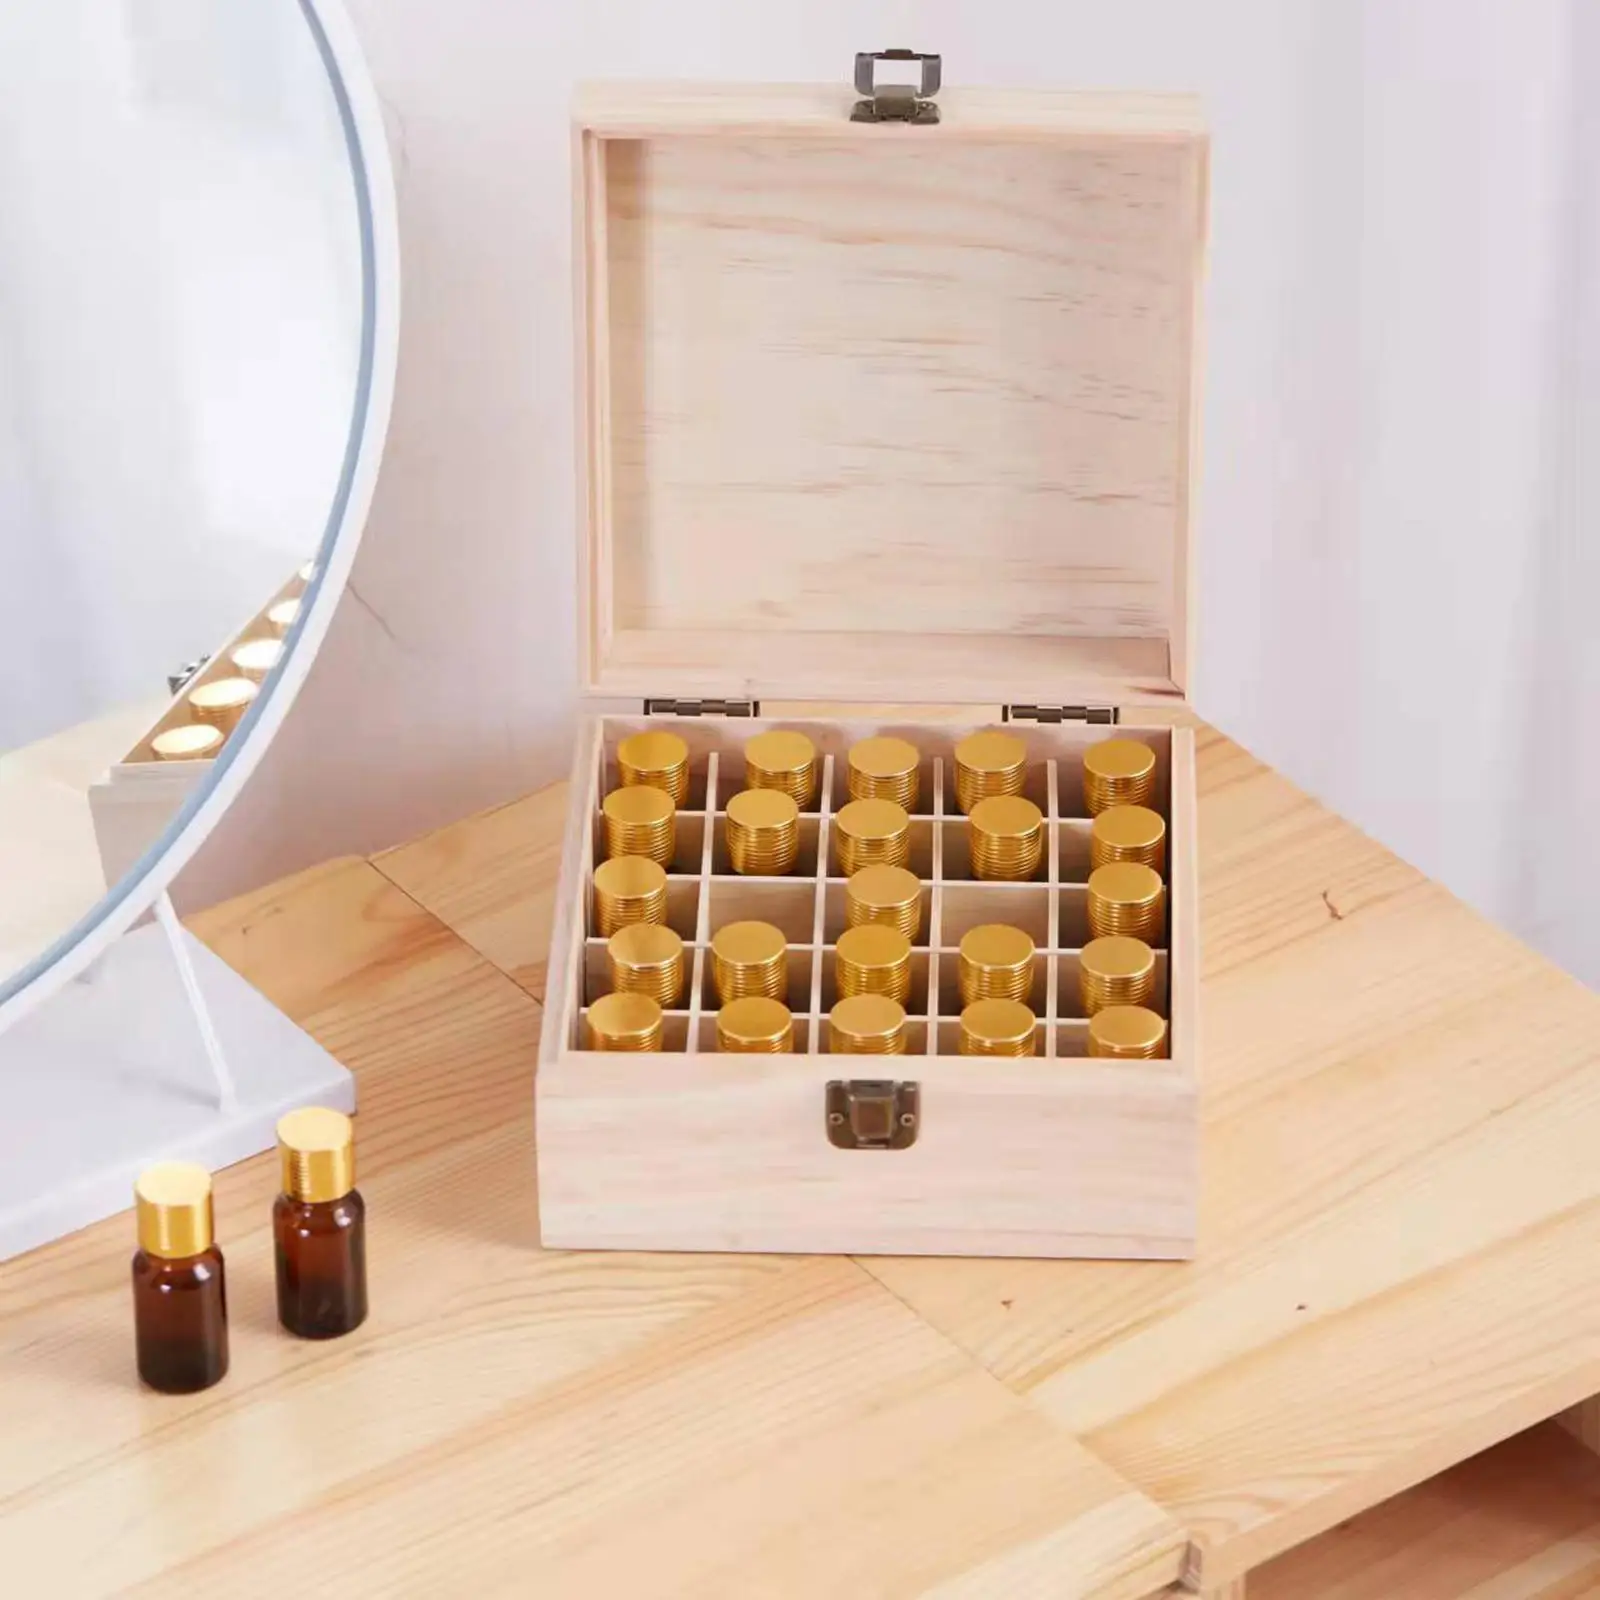 Essential Oil Bottle Storage Box Organizer, Carry Display Container for 5 ml 10 ml 15ml